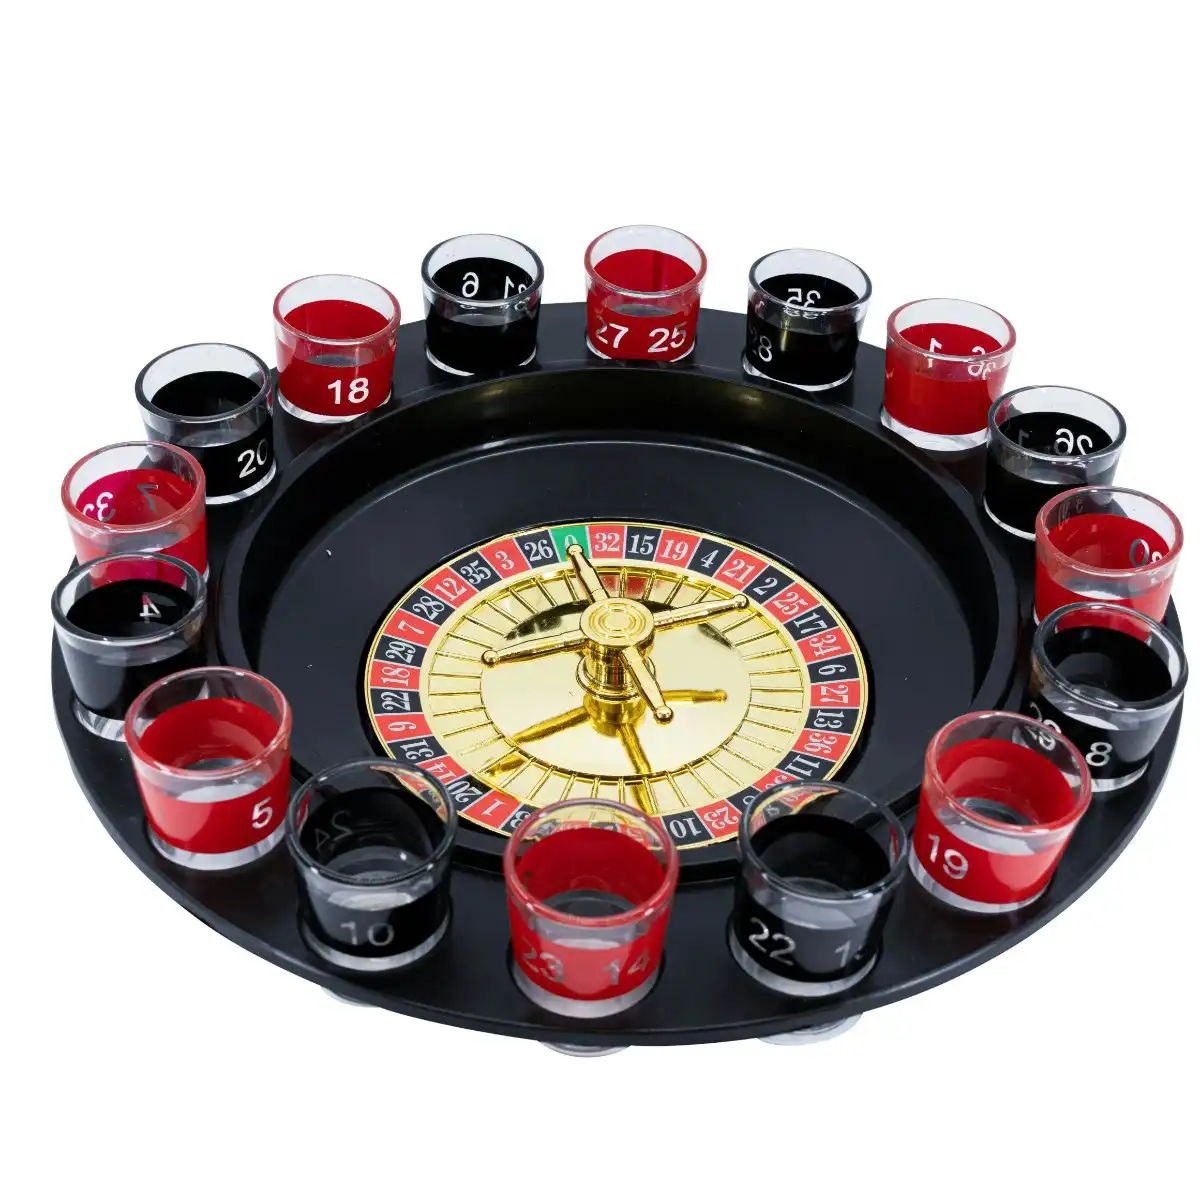 Pissed Shot Glass Roulette Drinking Game